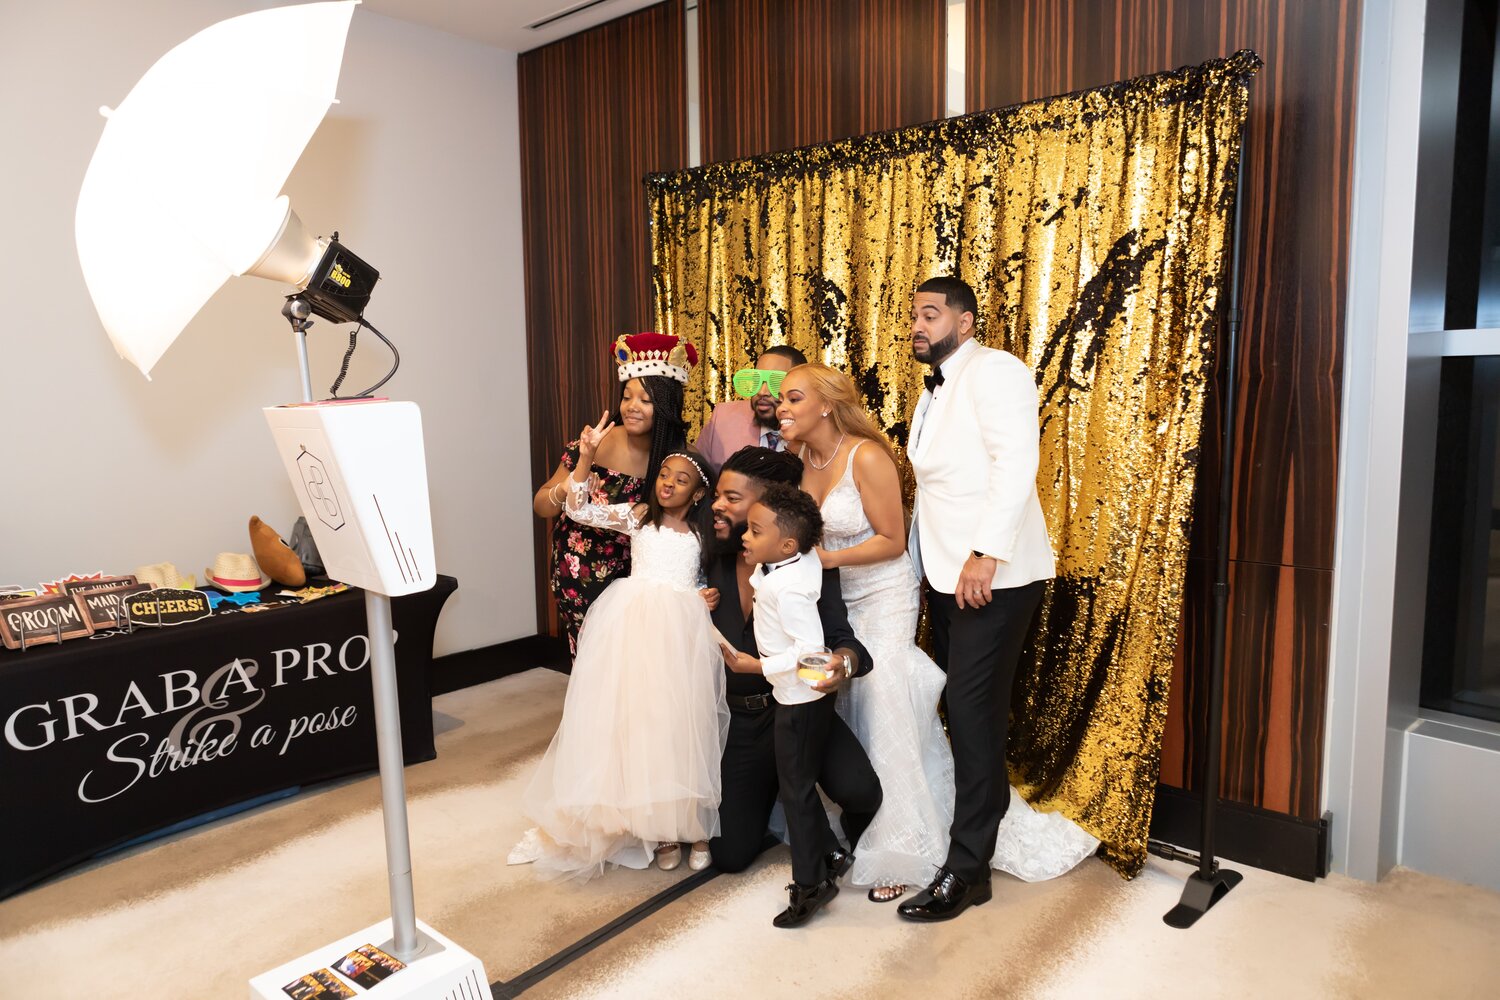 Things to Consider When Buying a Photo Booth